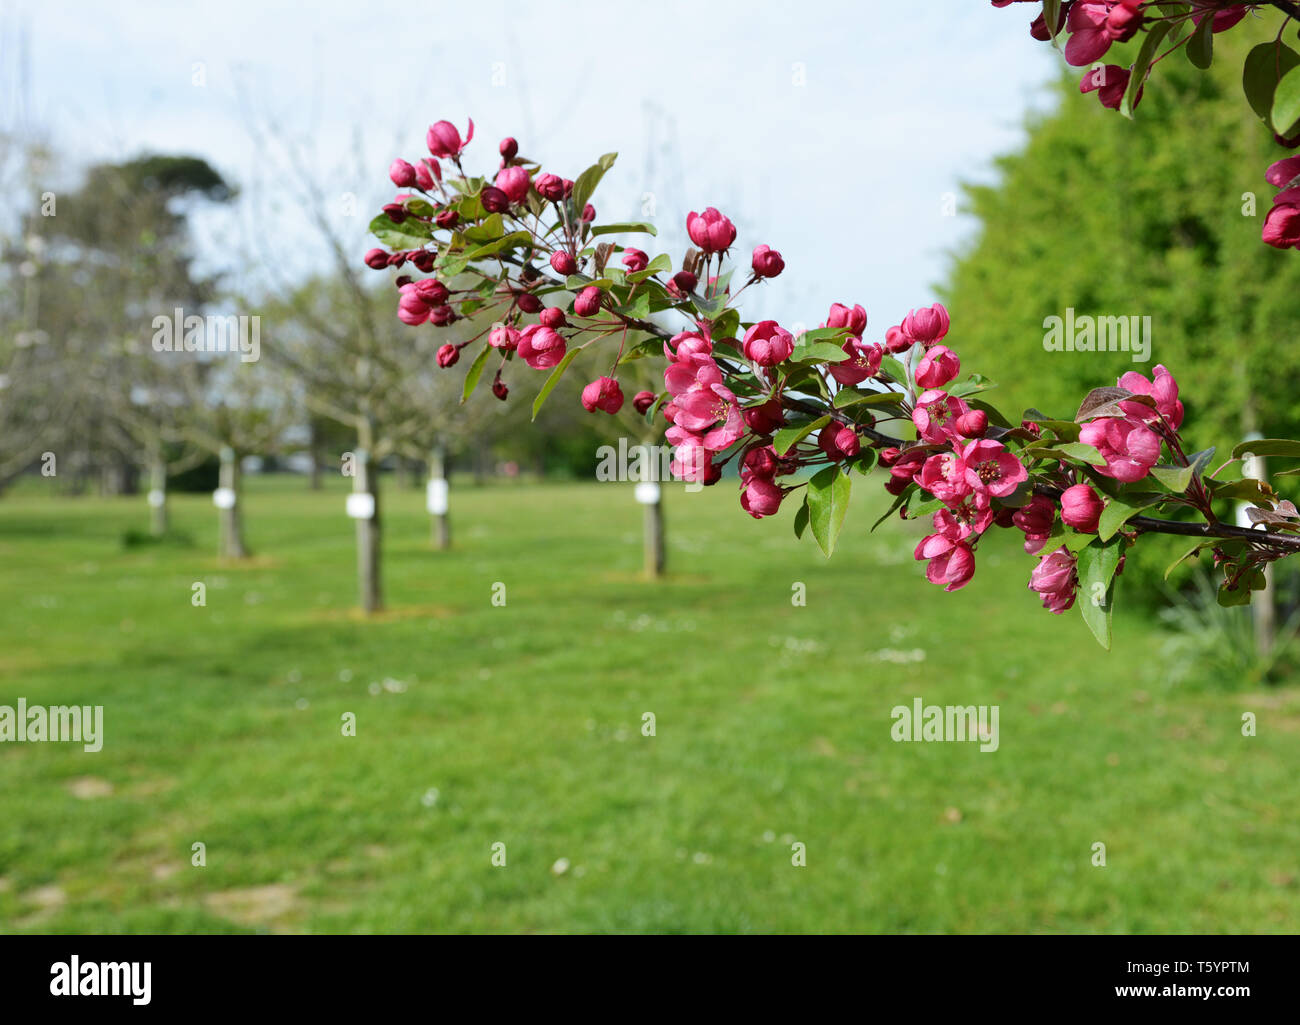 Malus Indian Magic crab apple blossom flowers in selective focus against the background of a small orchard Stock Photo